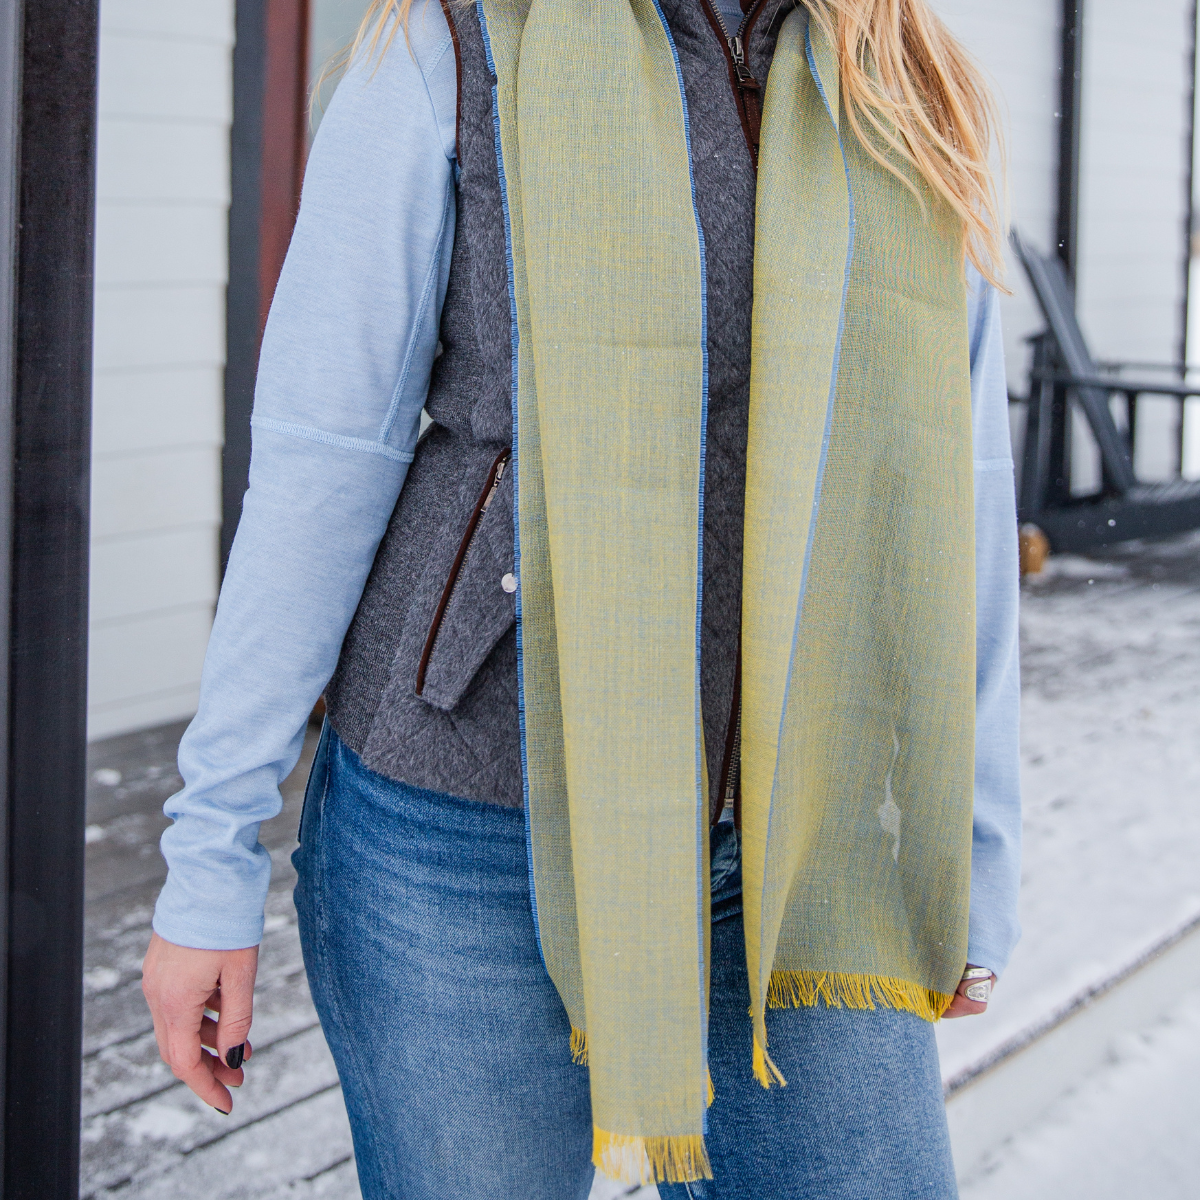 Woman in jeans outside wearing an alpaca sscarf with silk blue and yellow colors